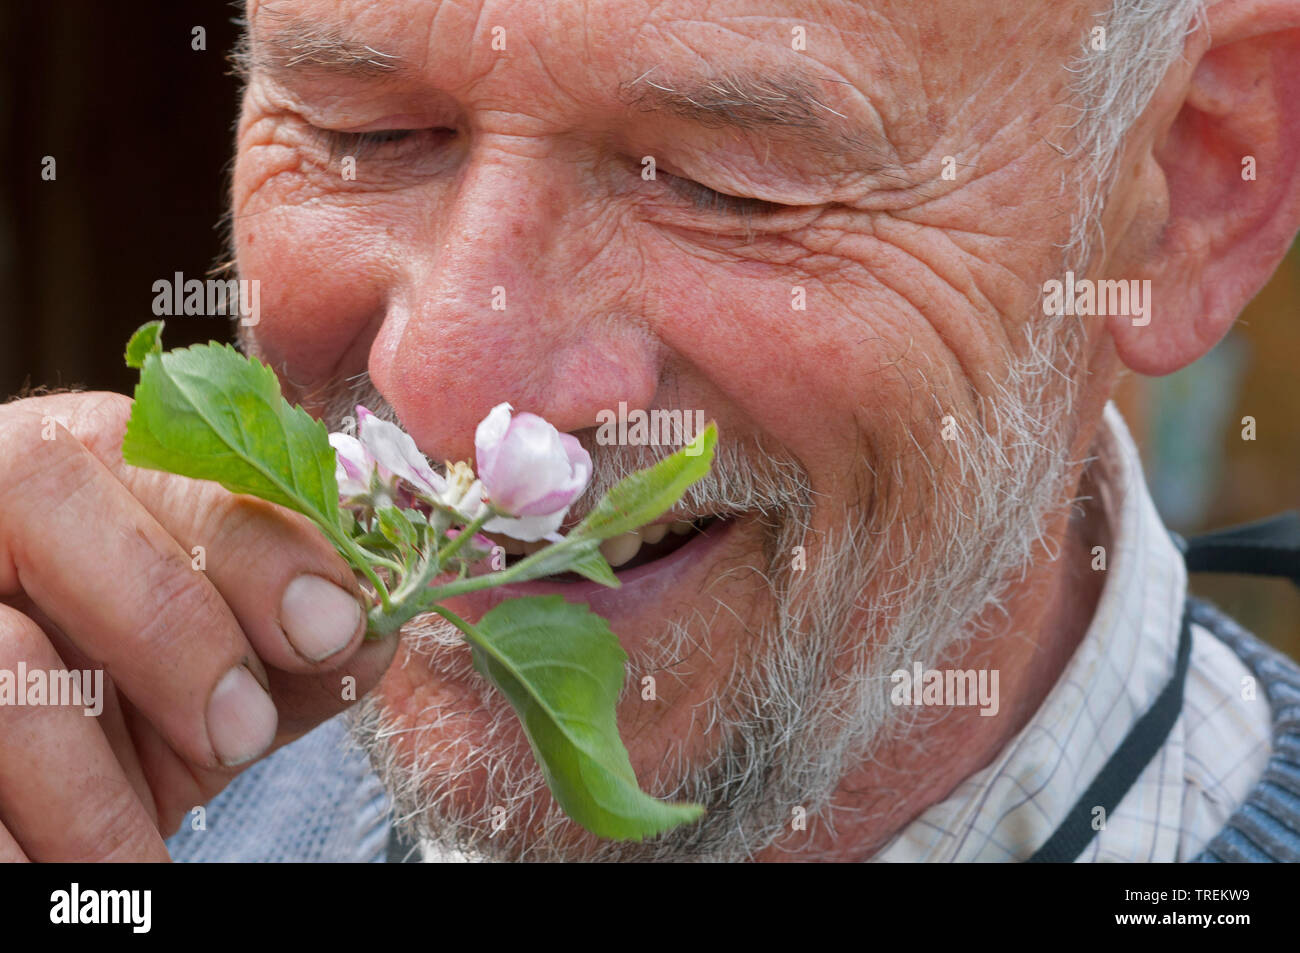 apple tree (Malus domestica), man smelling at an apple blossom, Germany Stock Photo